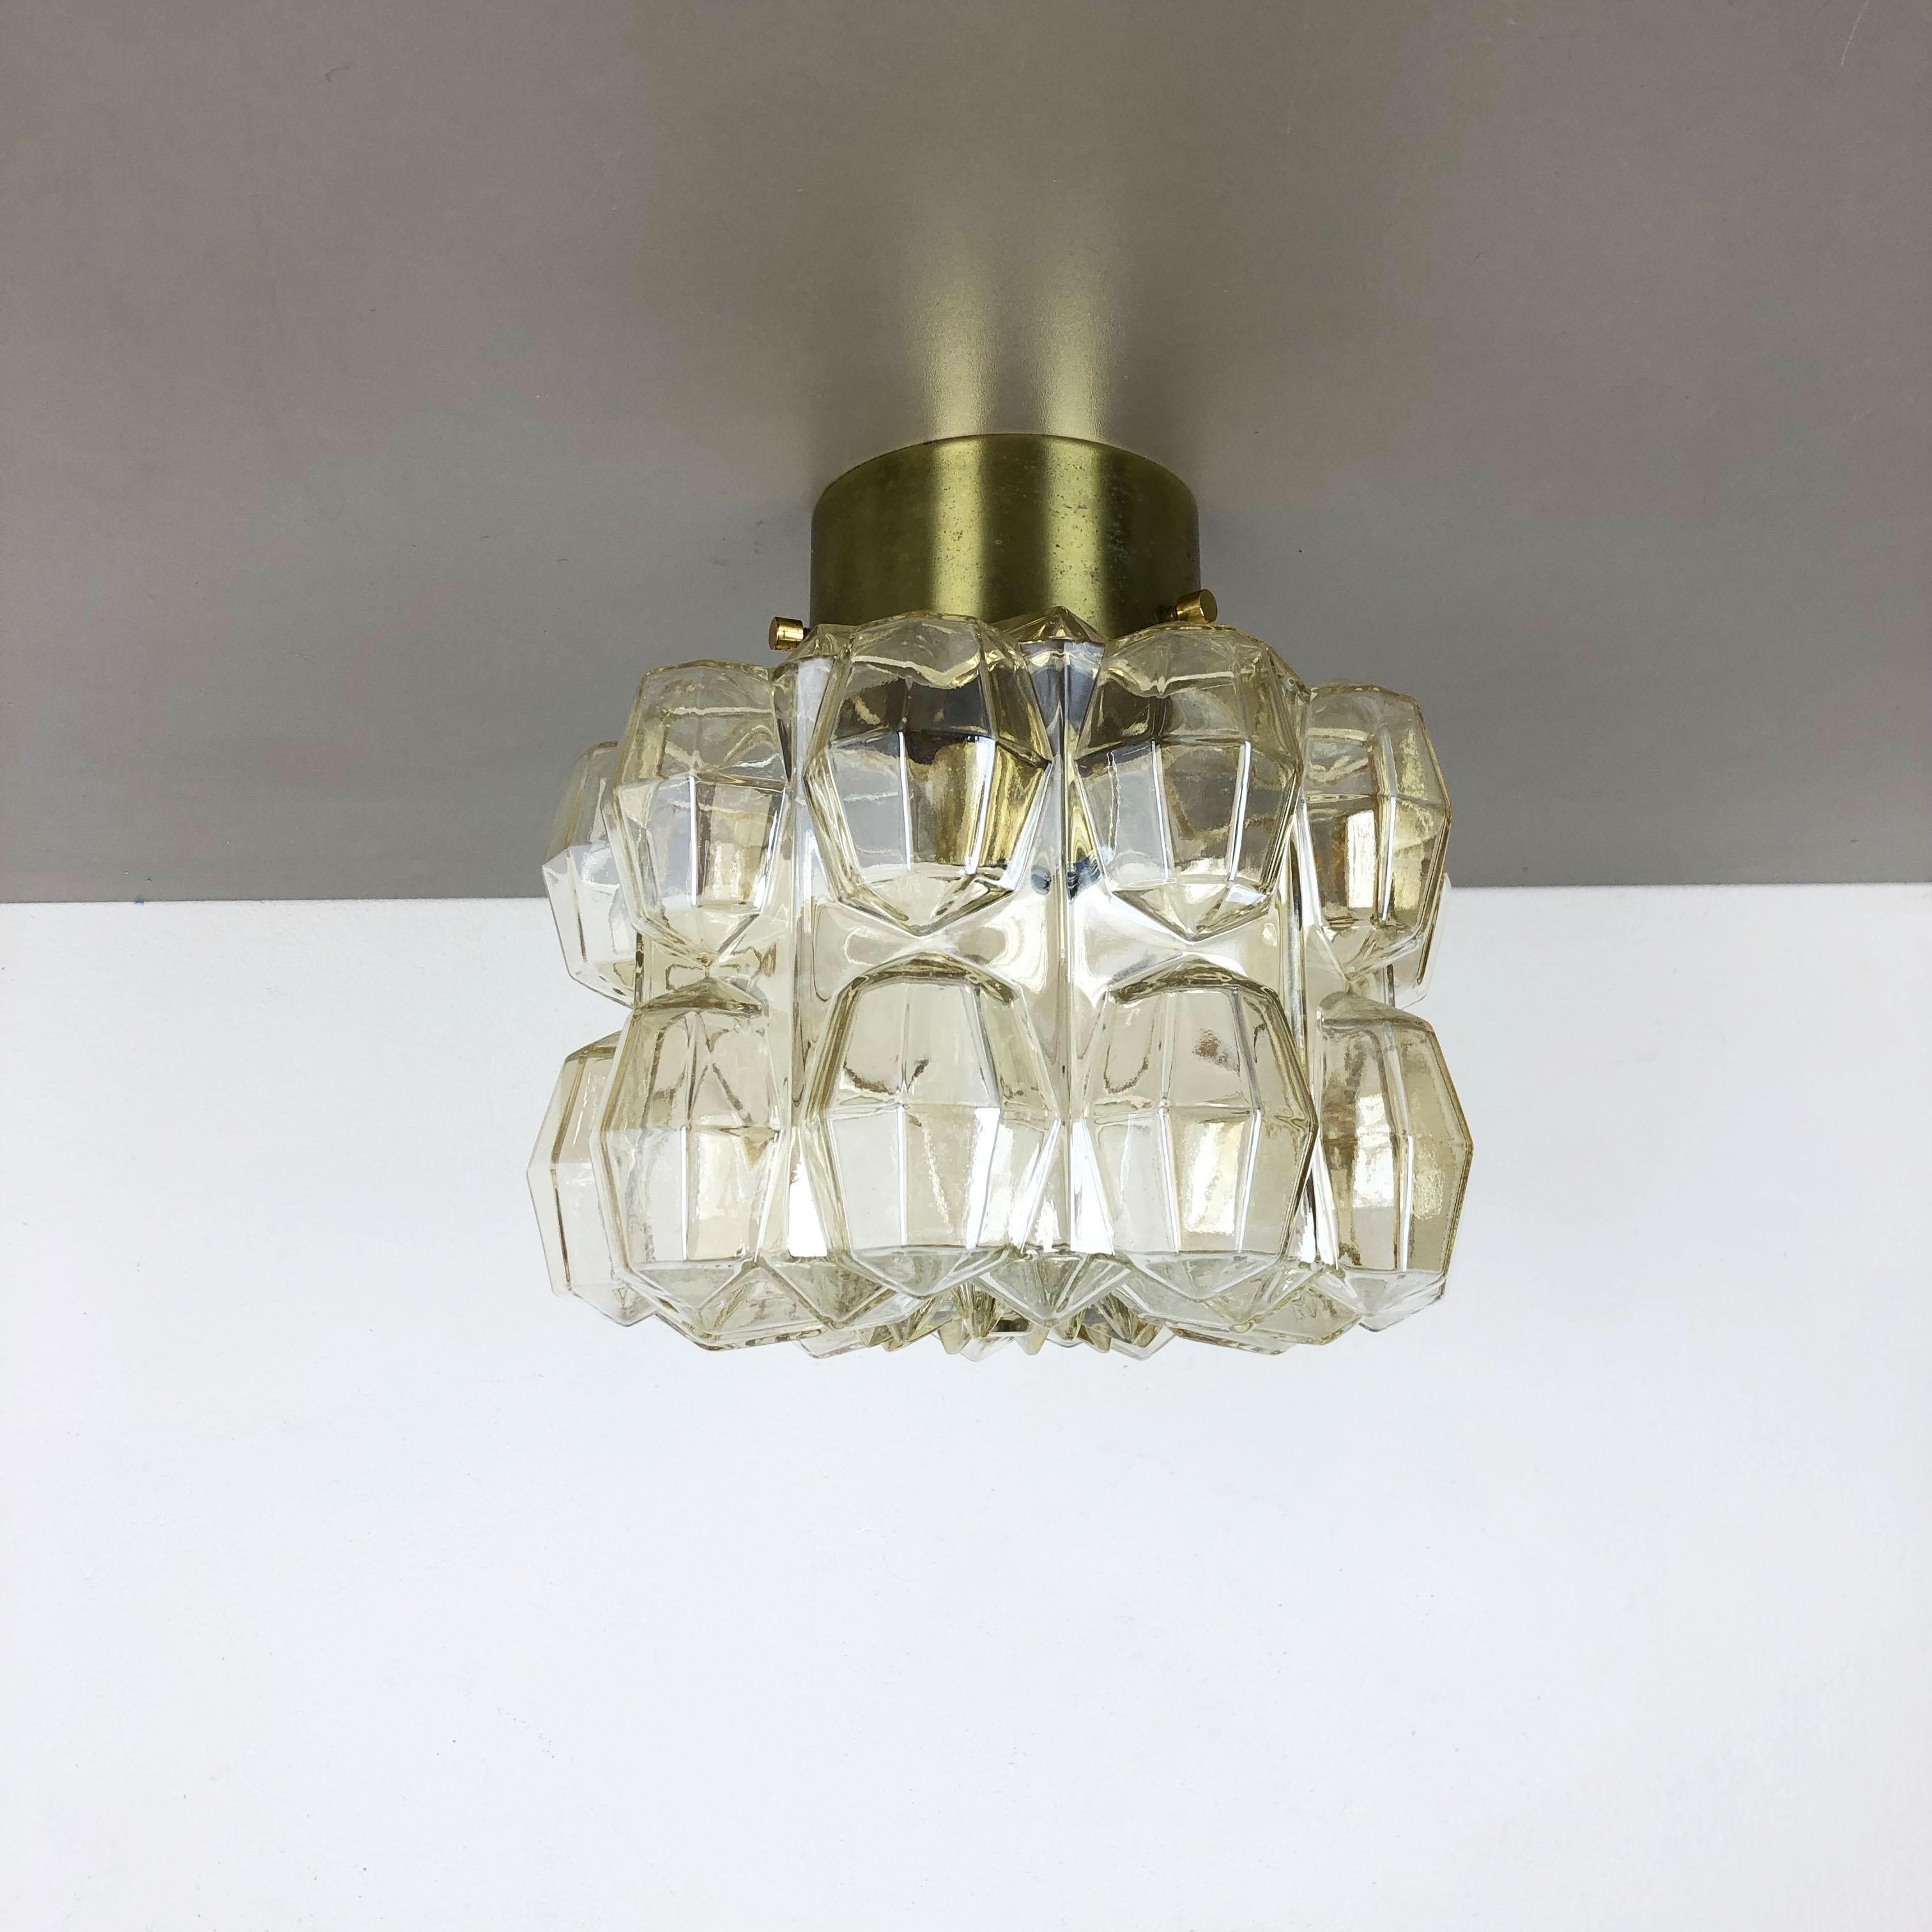 Article:

Ceiling light sconce


Producer:

Glashütte Limburg, Germany



Origin:

Germany



Age:

1970s





Original 1970s modernist German ceiling Light made of high quality yellow glass in cubic diamond form with a